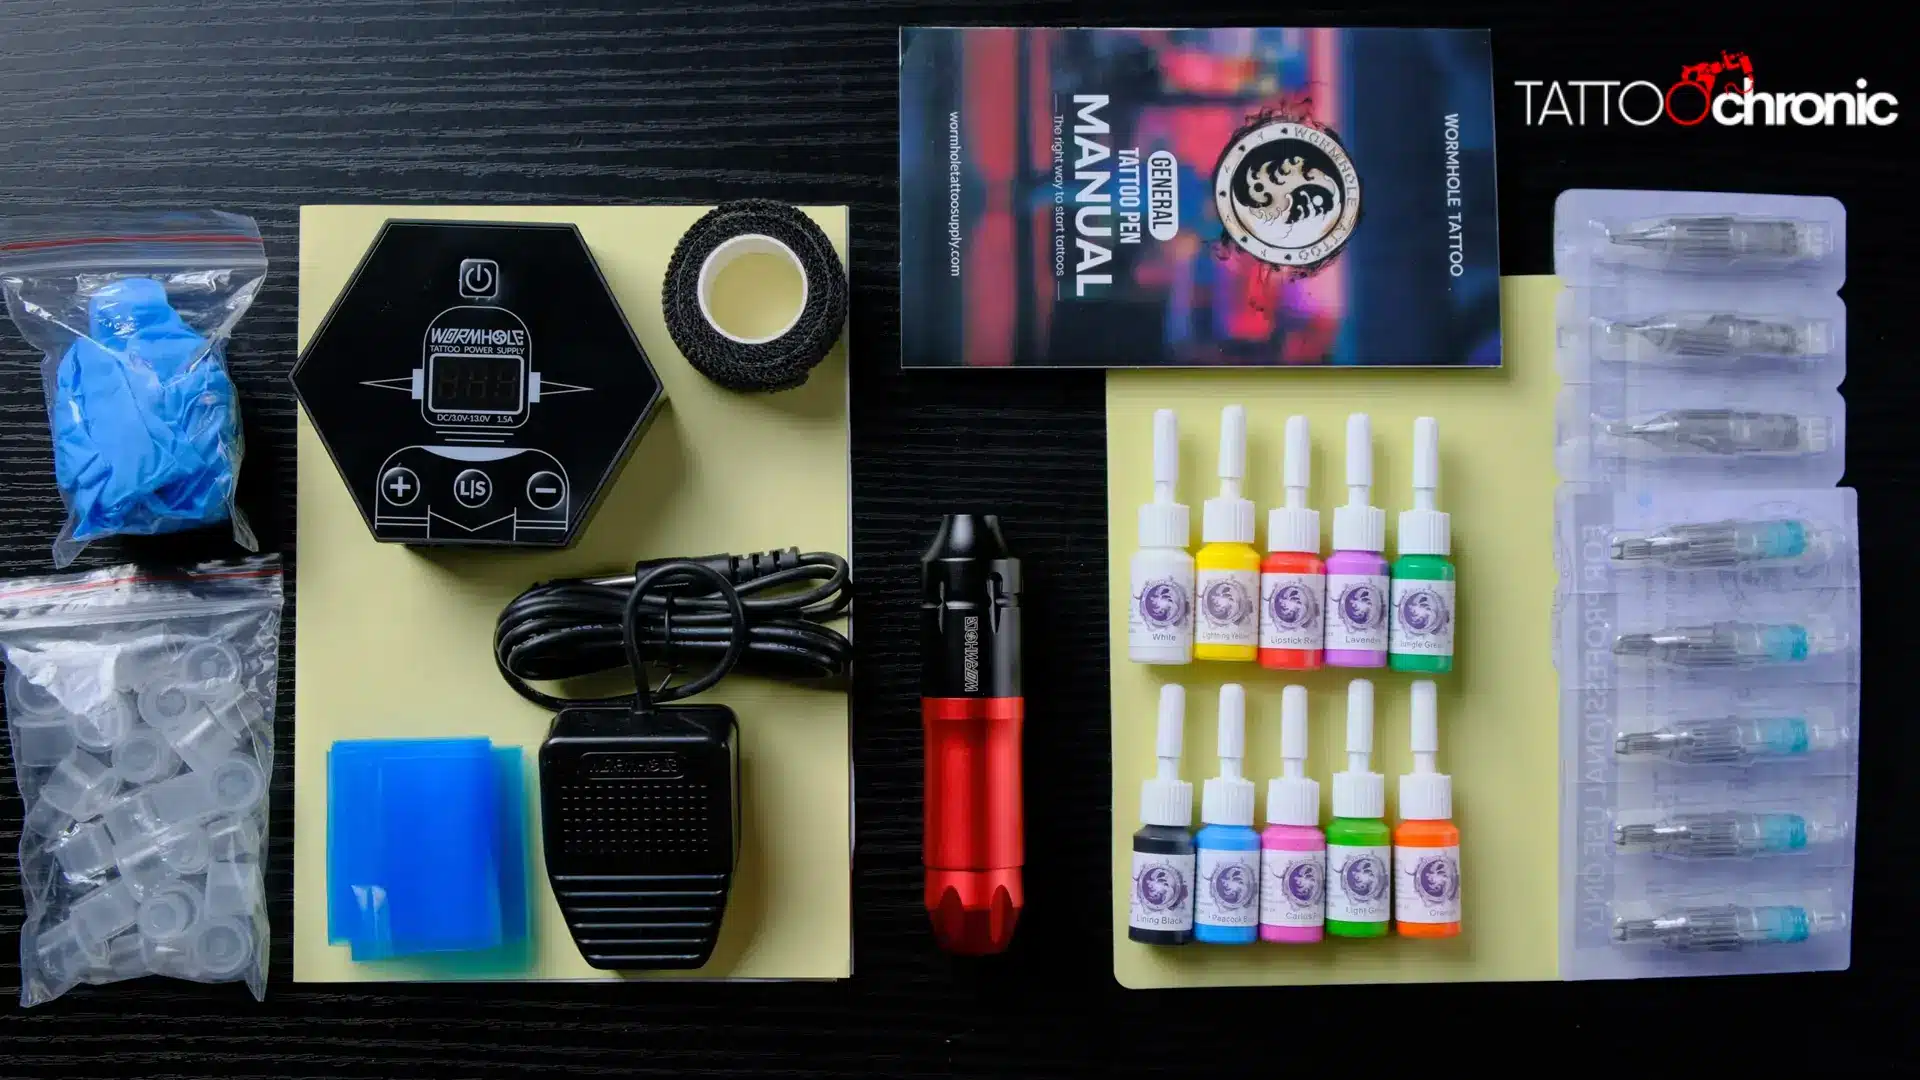 Wormhole Tattoo Pen Kit Review for Beginners Unboxing tattoochronic com